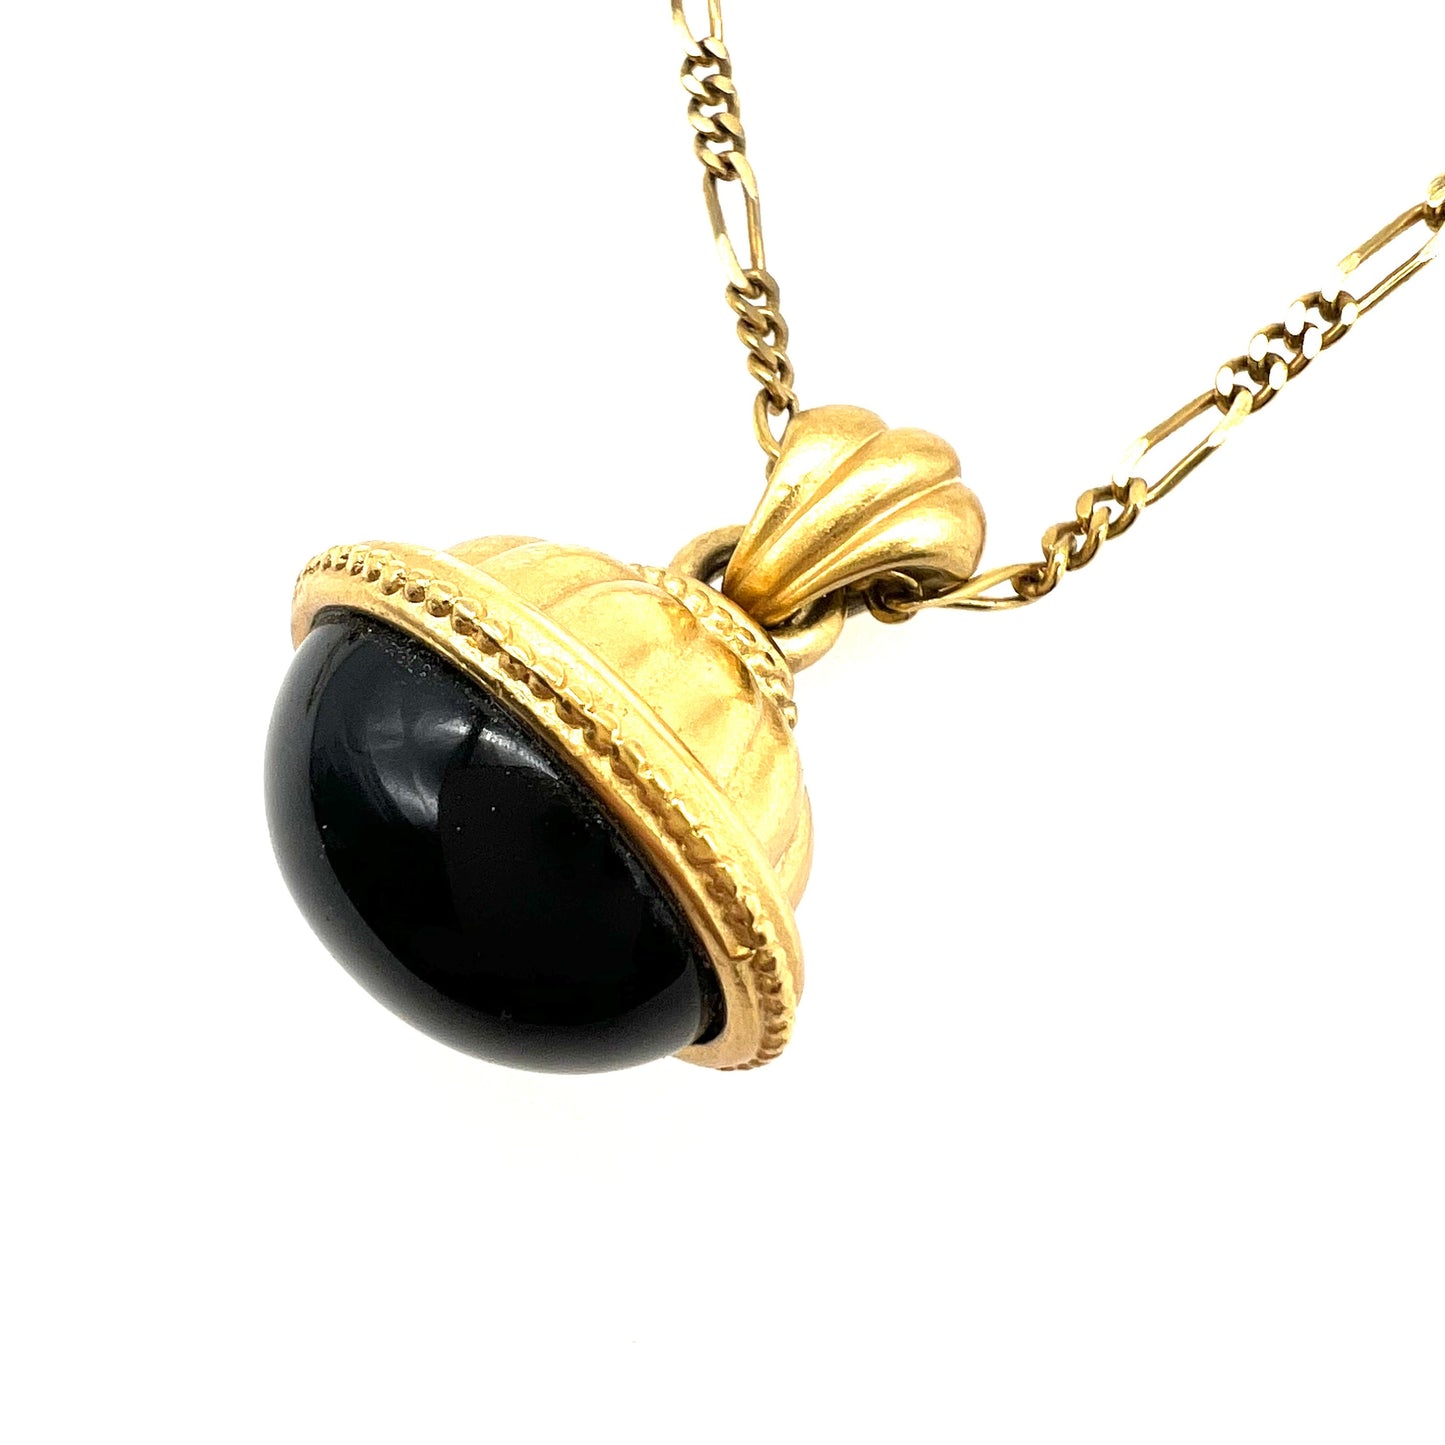 Monet Long Figaro Station Necklace with Black Glass Fob Pendant